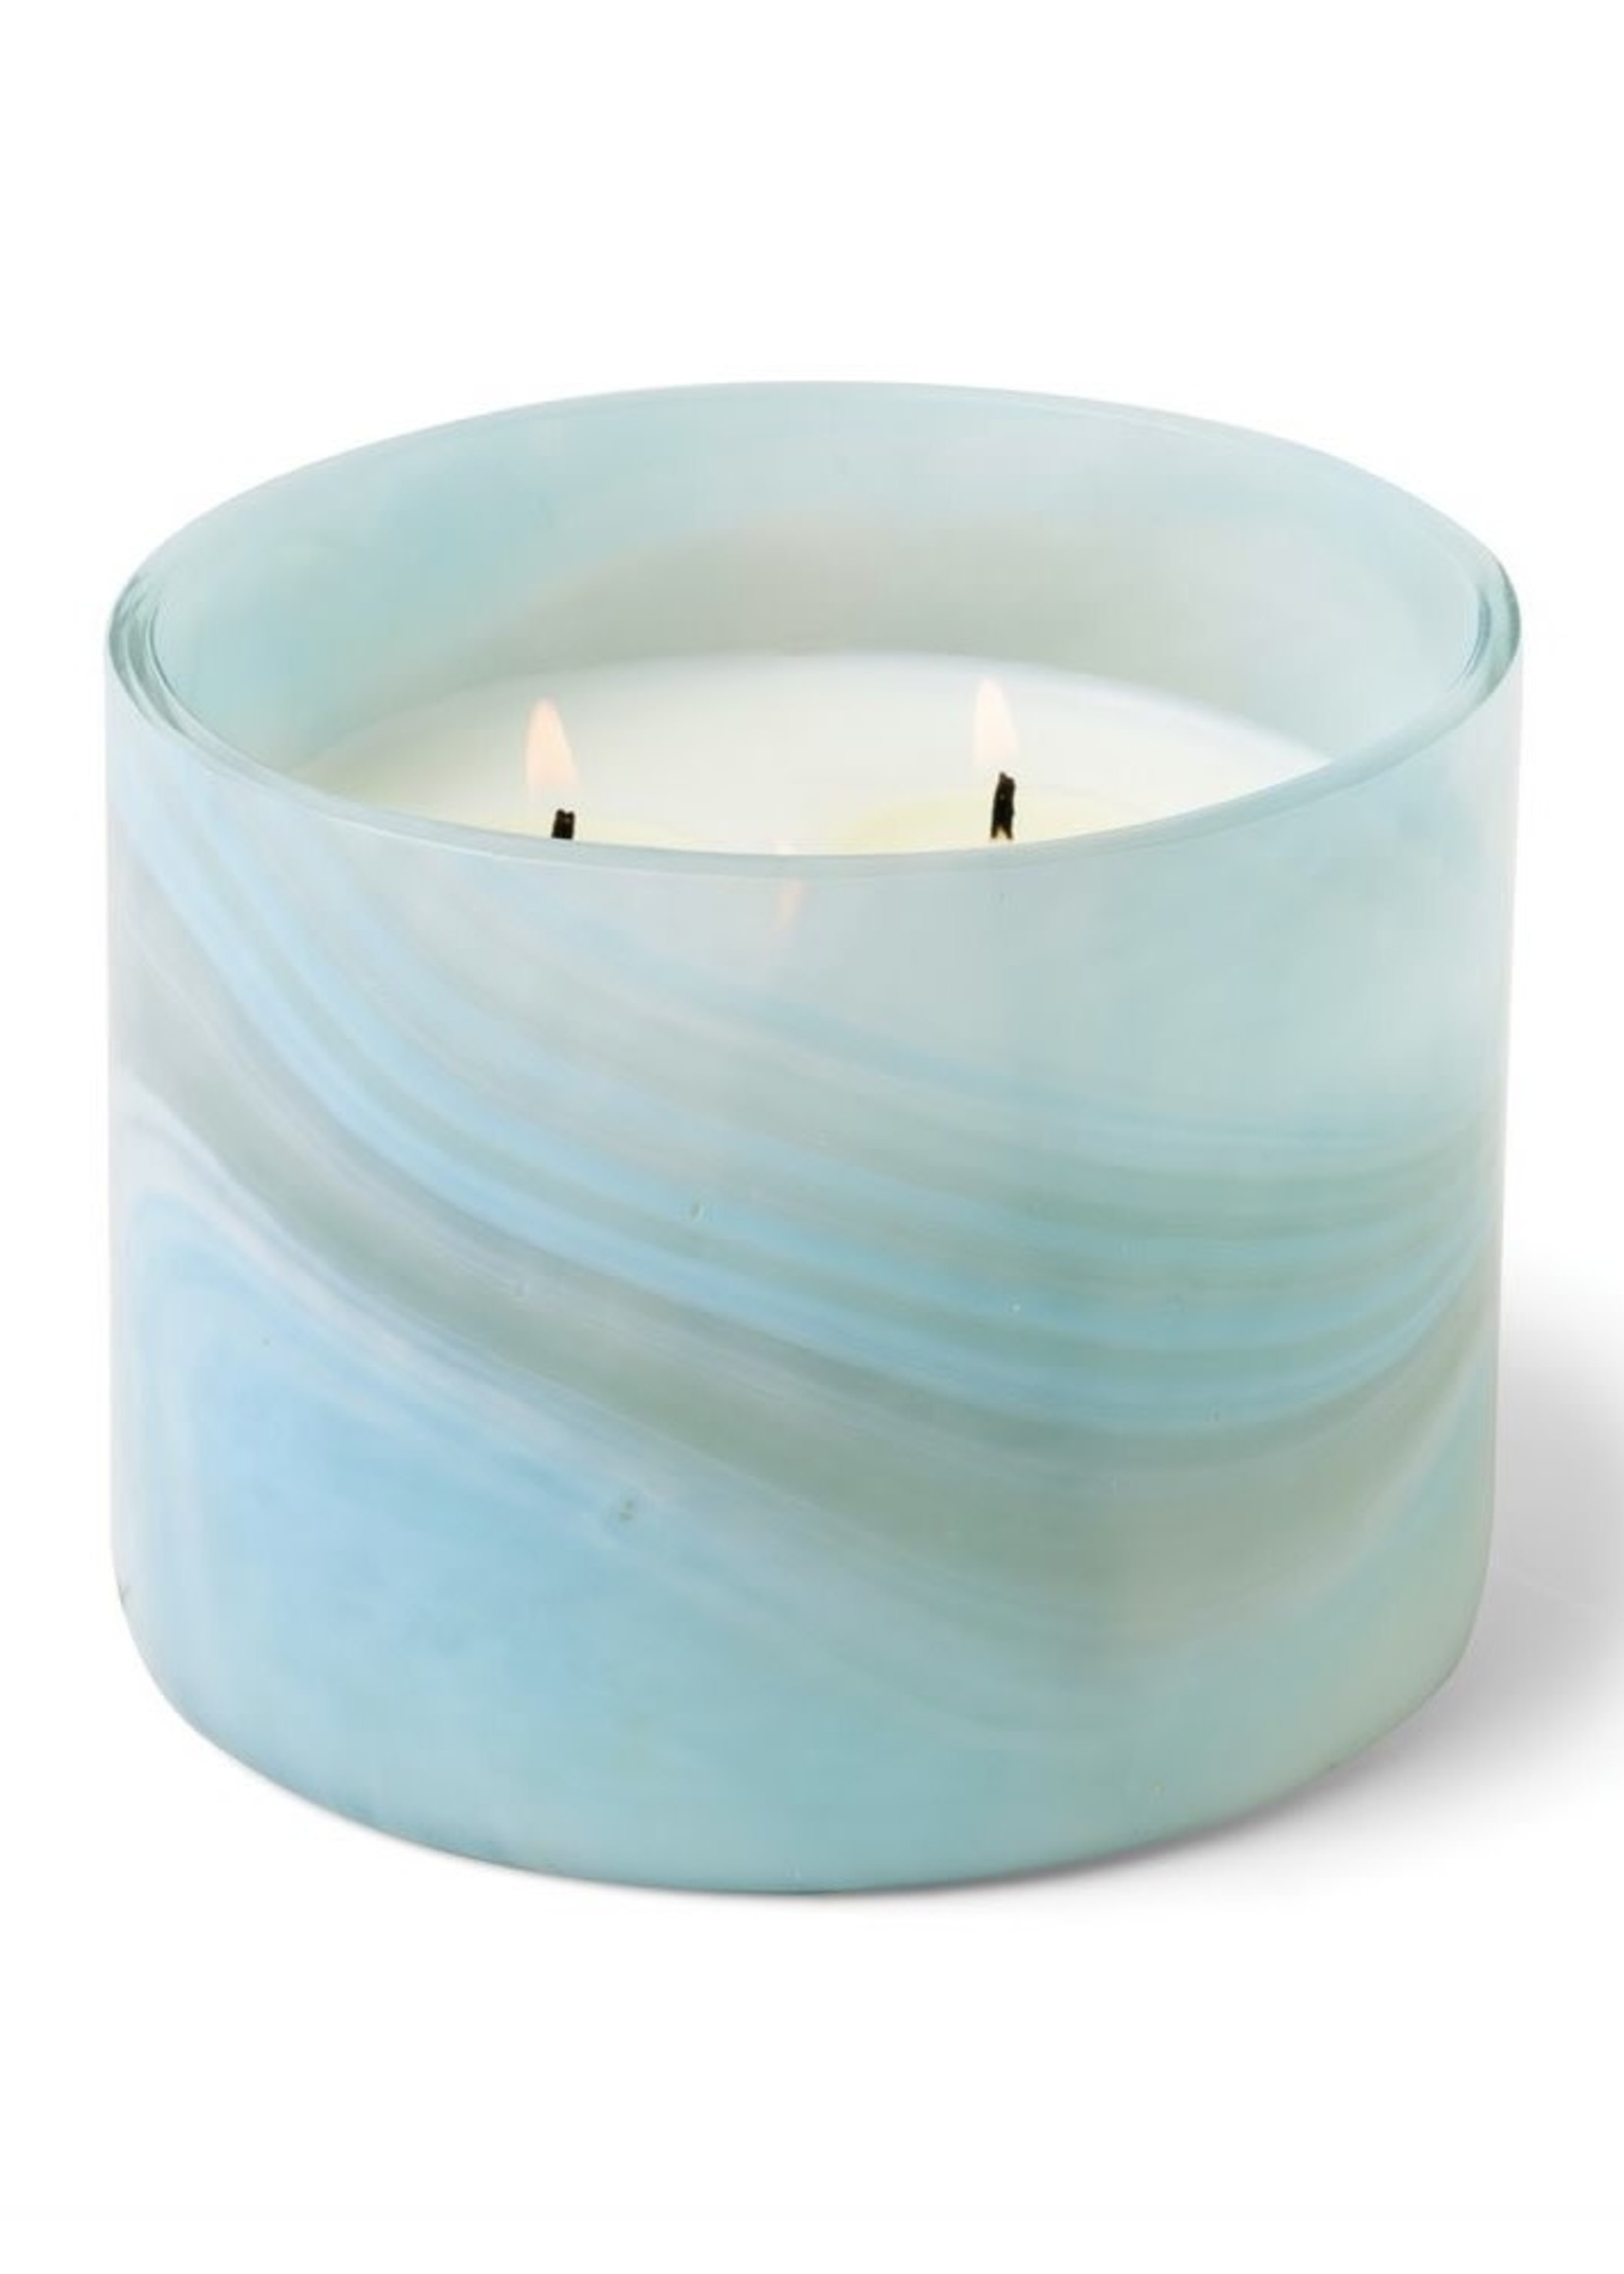 Paddywax "Whirl" Candle by Paddywax